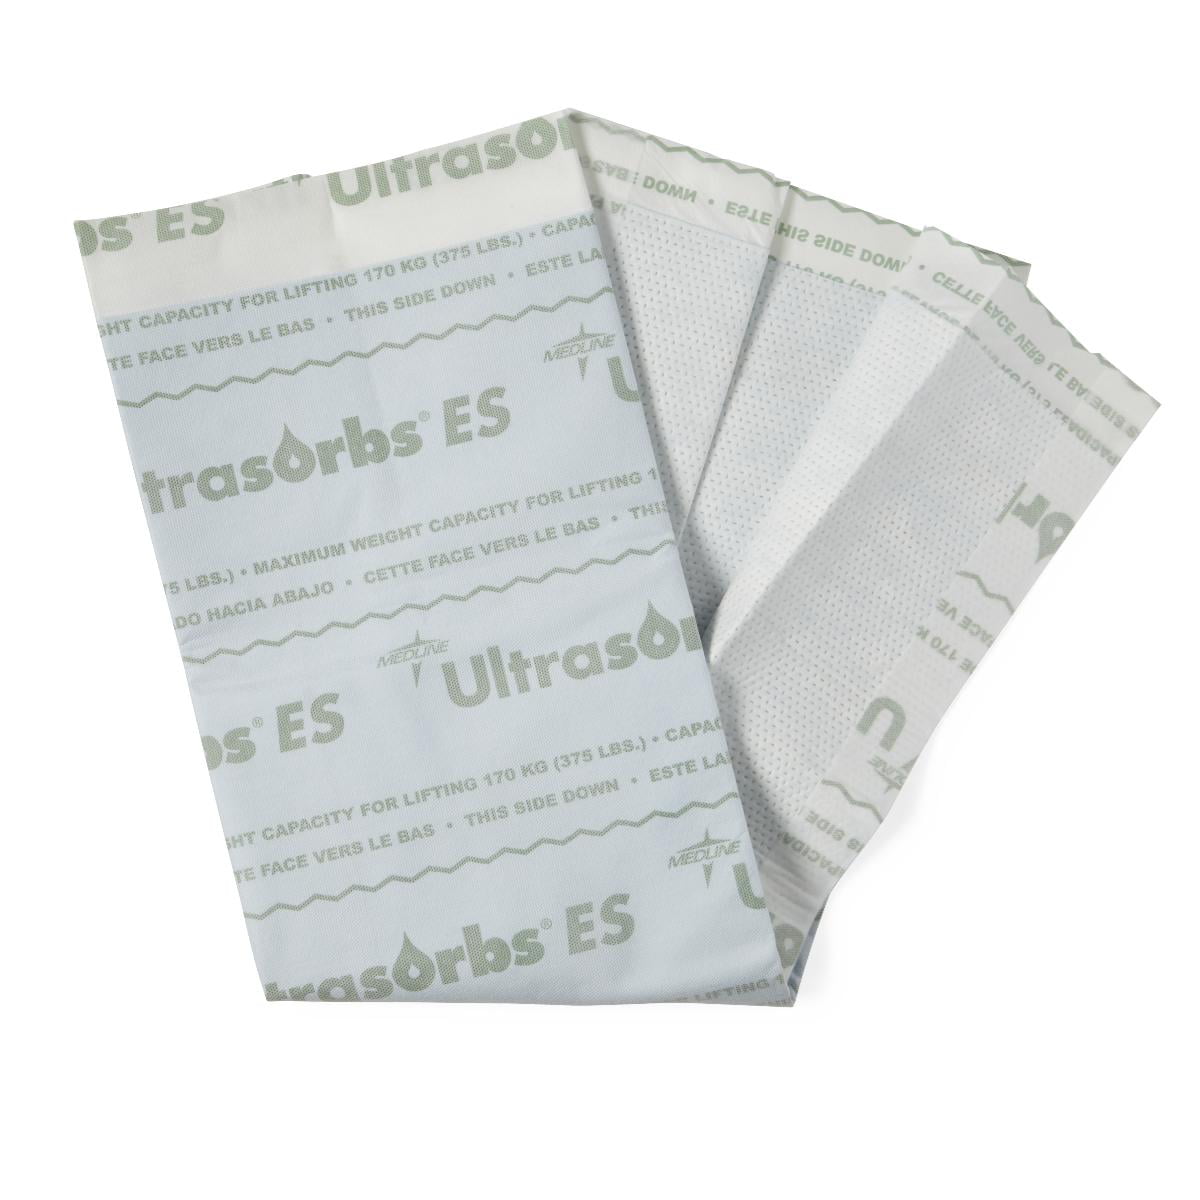 Medline Underpad, Extra Strong, Ultra sorbs ES,31X36 - 40 Each ...